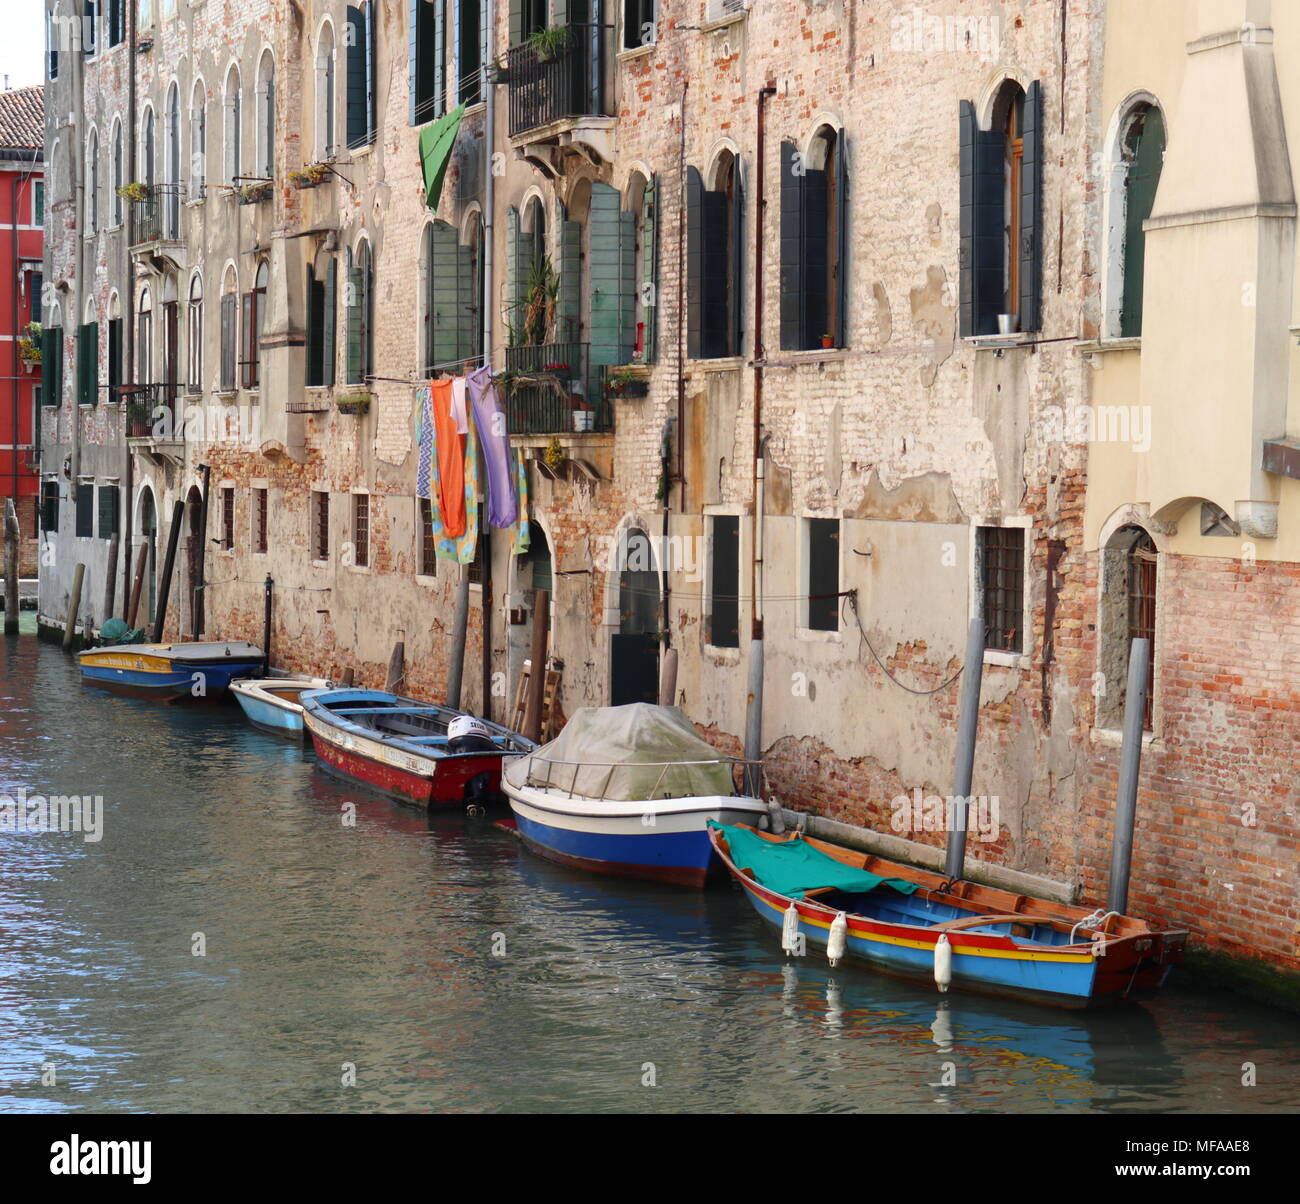 Picturesque scenery, colourful boats, old facade with shutters, canal, Venice, Italy, Europe Stock Photo